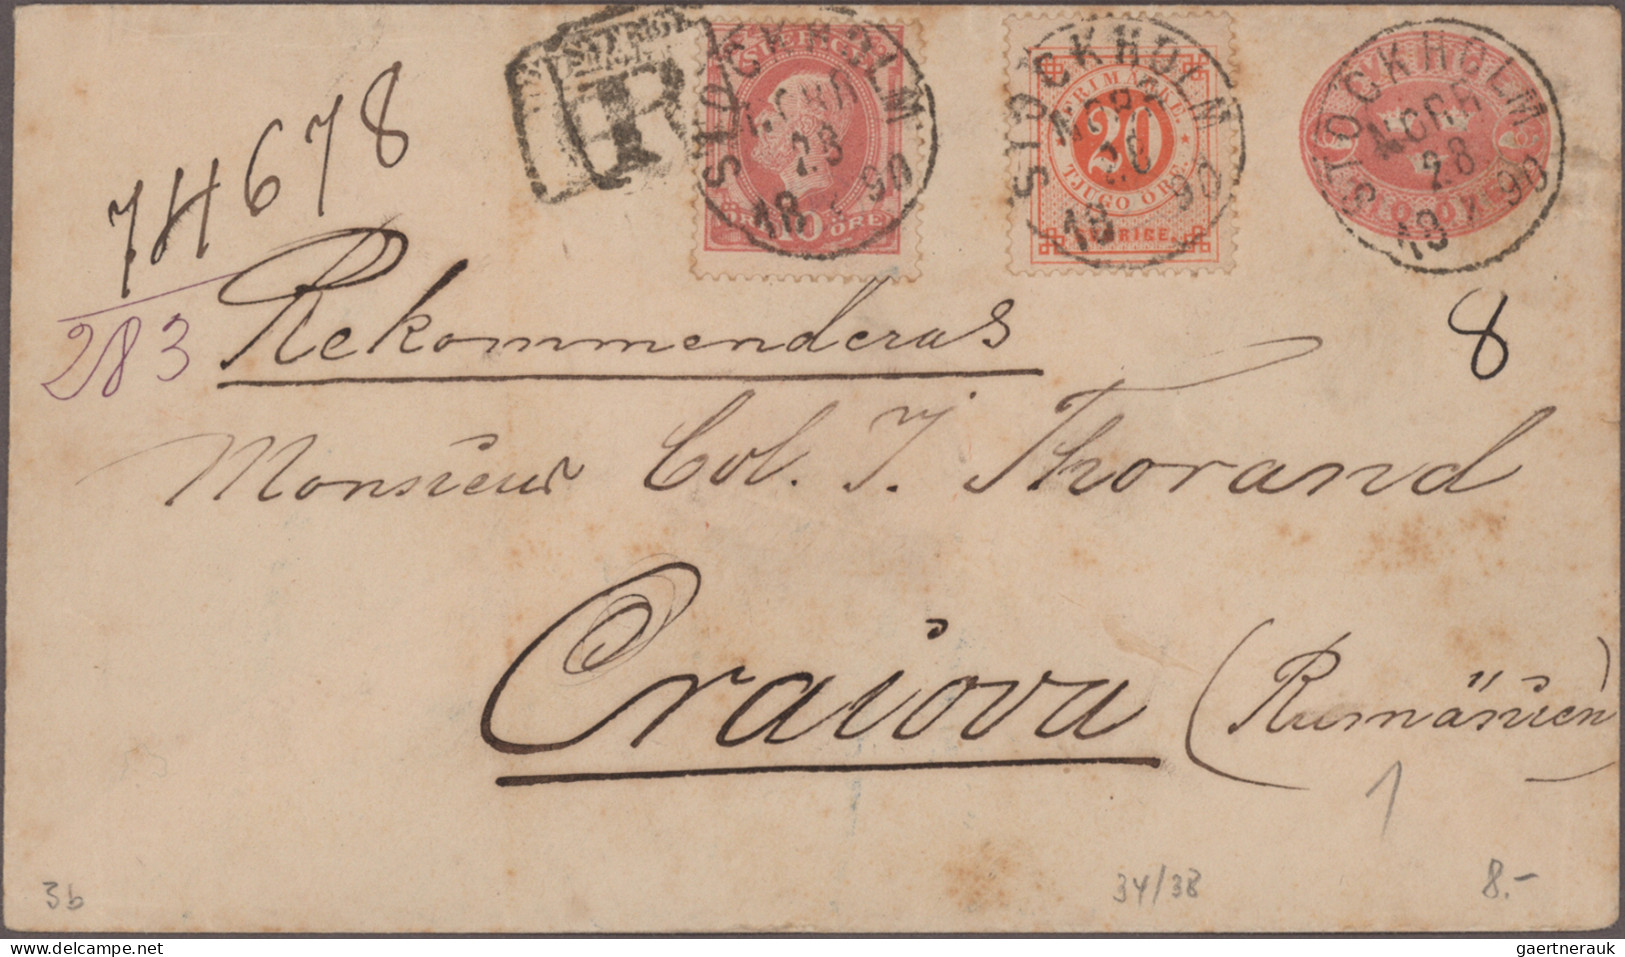 Sweden: 1855/1990 (approx.), interesting and well-stocked collections from the f